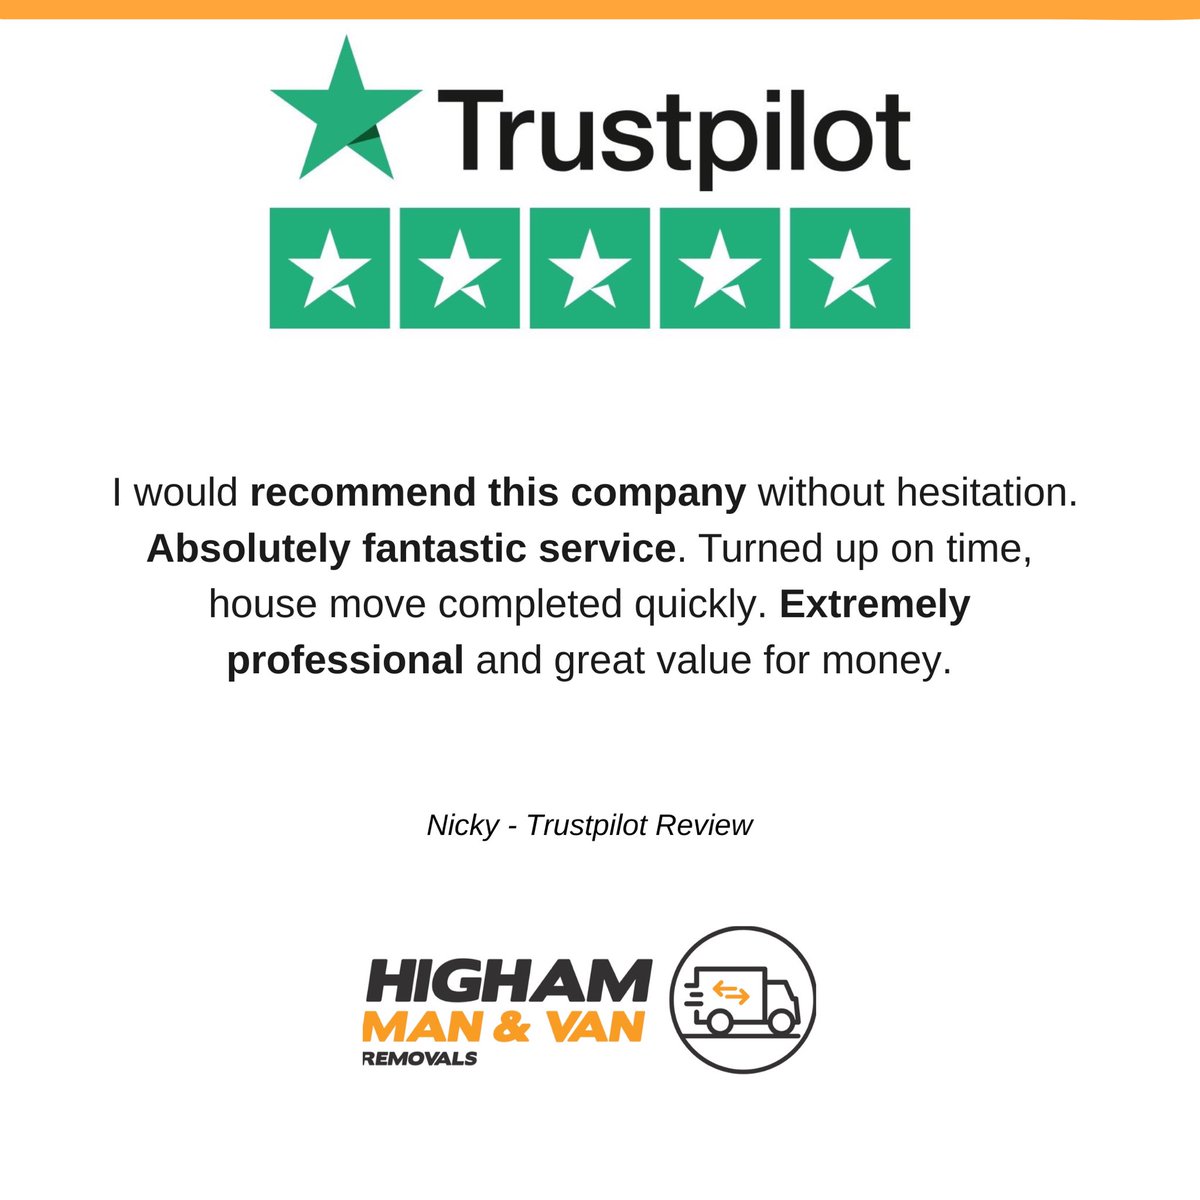 5 Star Service Guaranteed ✳️✅

🏘 Home removals 
🏢 Office relocations 
🔐 Storage Services
🛋 Single Items 
📝 Store collections
🛠 Assembling service

#highammanandvanremovals #highamferrers #northamptonshire #removals #storage #movinghome #movingoffice #trustpilot #5star